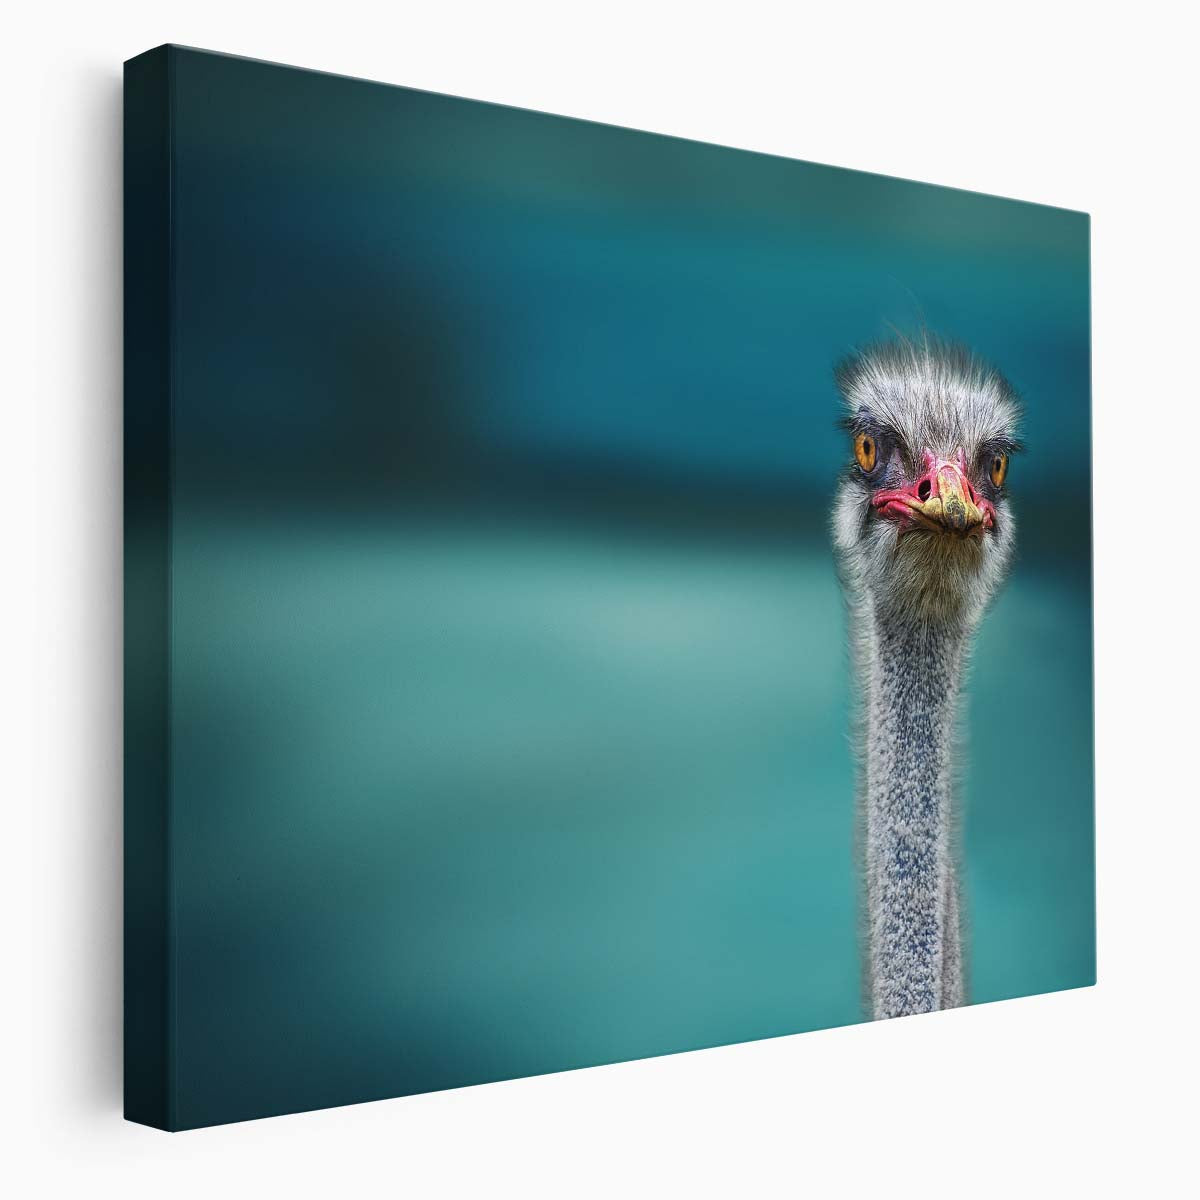 Belgian Ostrich Humor Turquoise Bokeh Bird Wall Art by Luxuriance Designs. Made in USA.